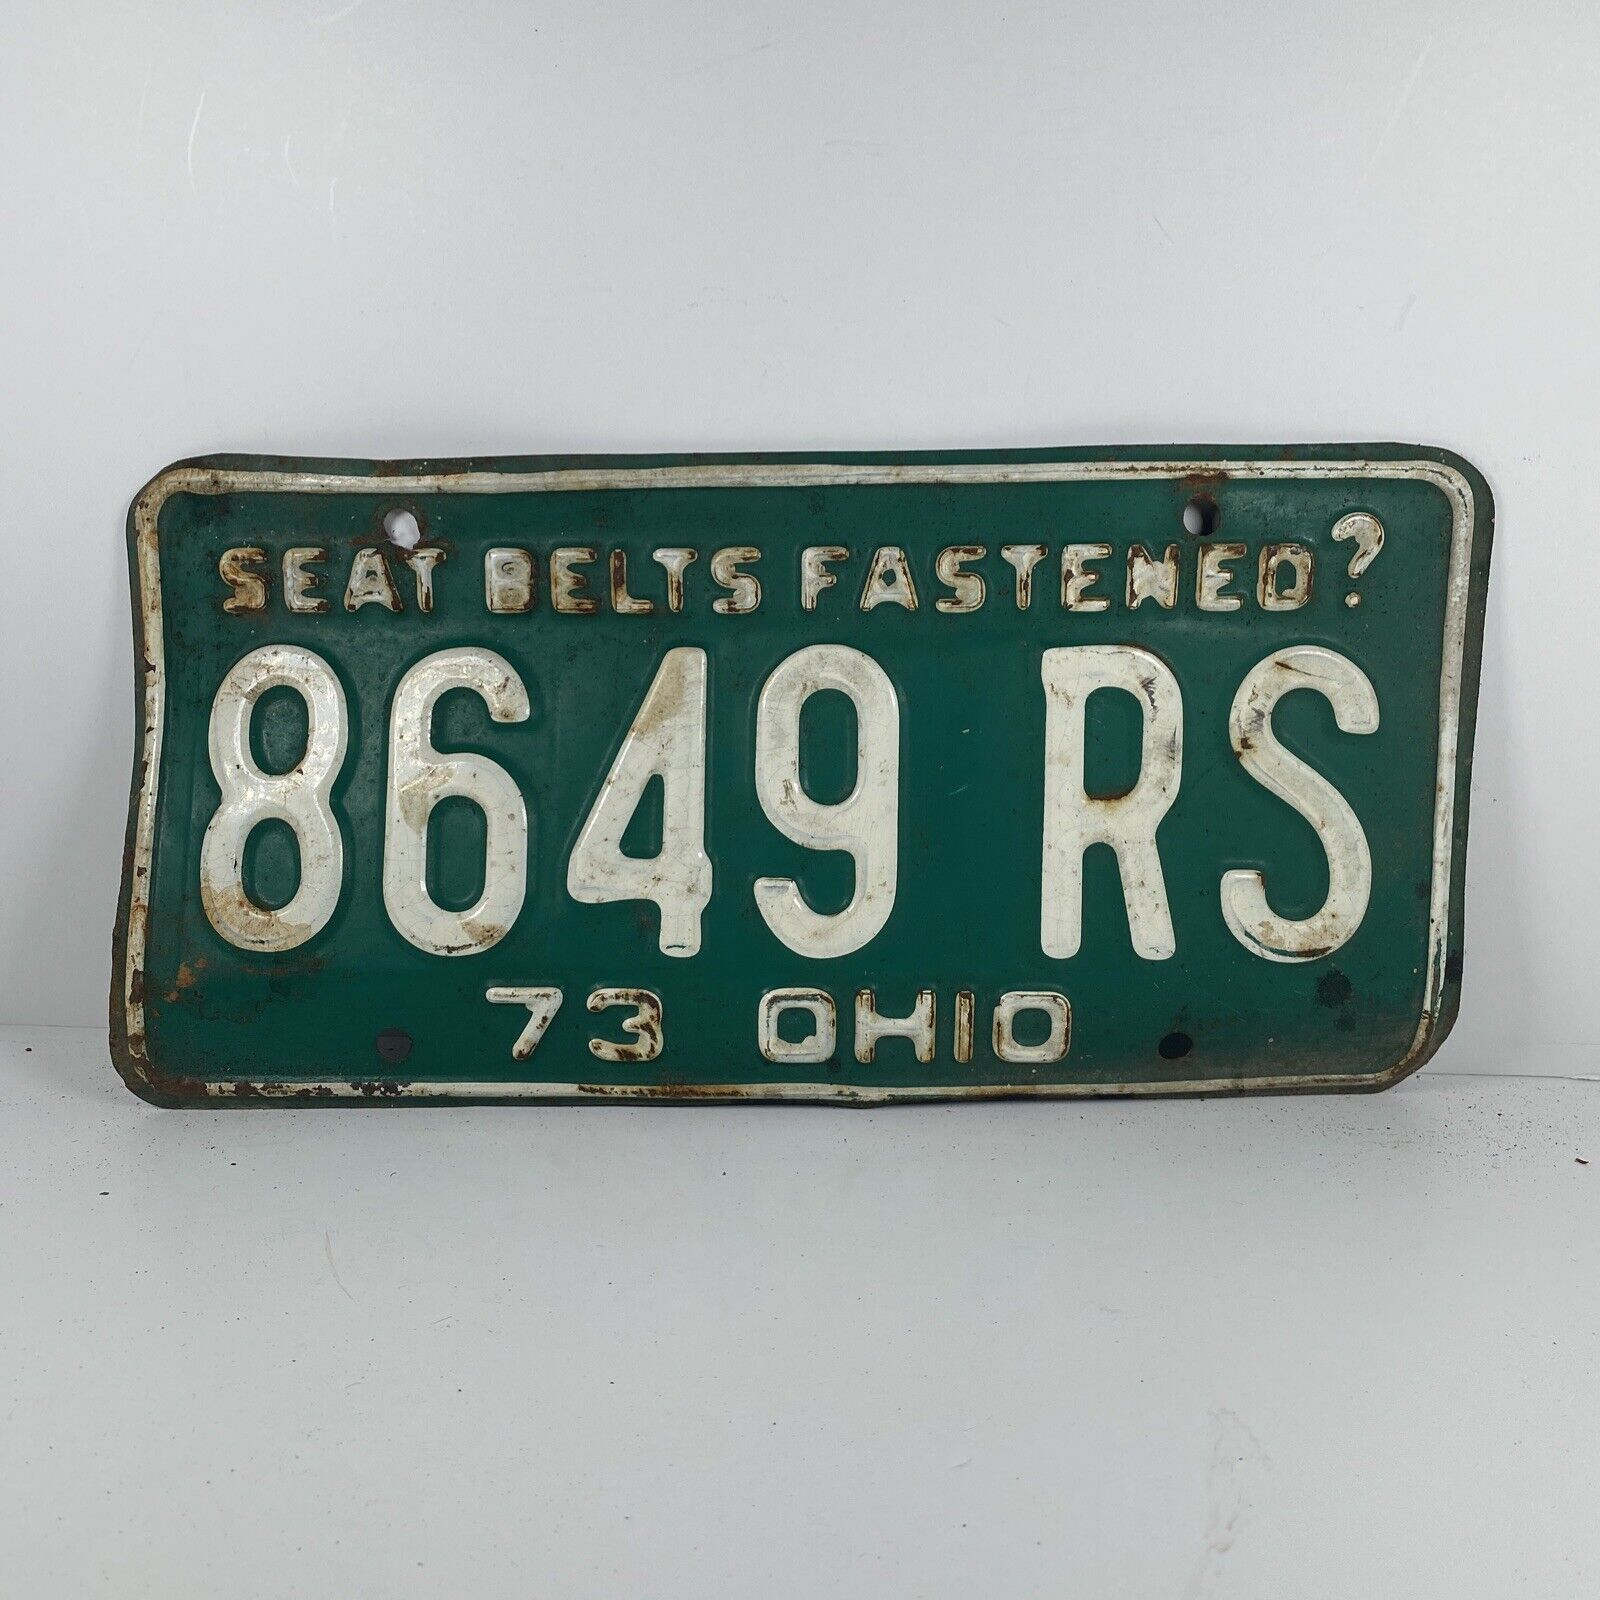 Vintage Ohio Oh License Plate 1973 Seat Belts Fastened? No. 8649 Rs Green White